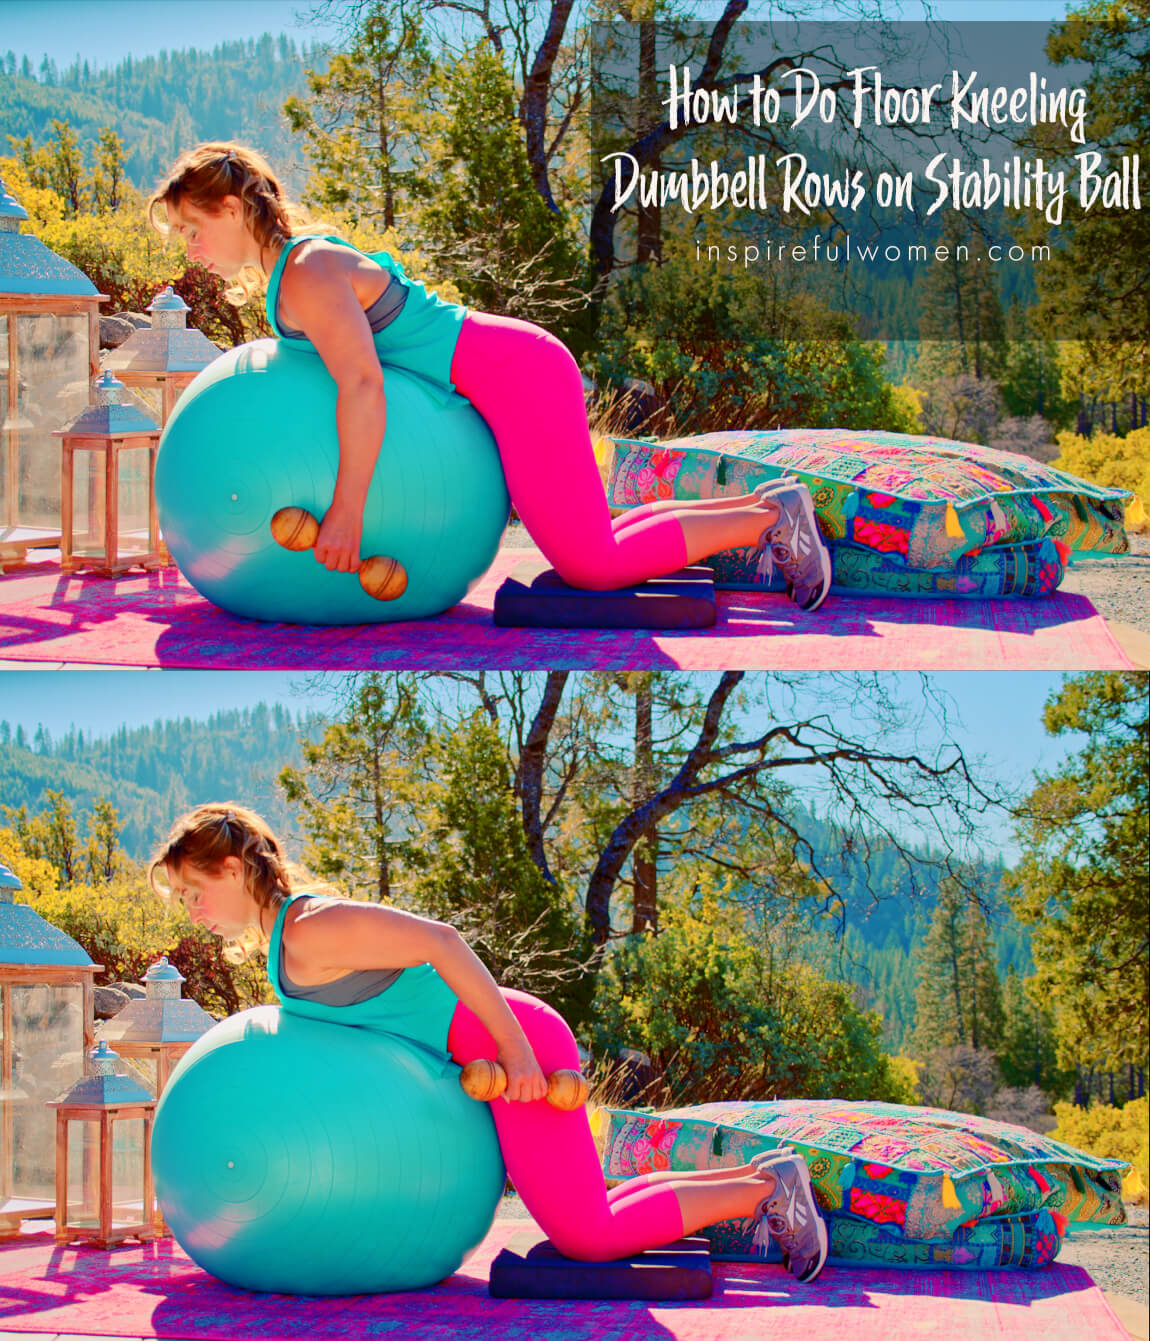 how-to-do-floor-kneeling-two-arm-dumbbell-rows-on-stability-ball-lats-exercise-at-home-side-view